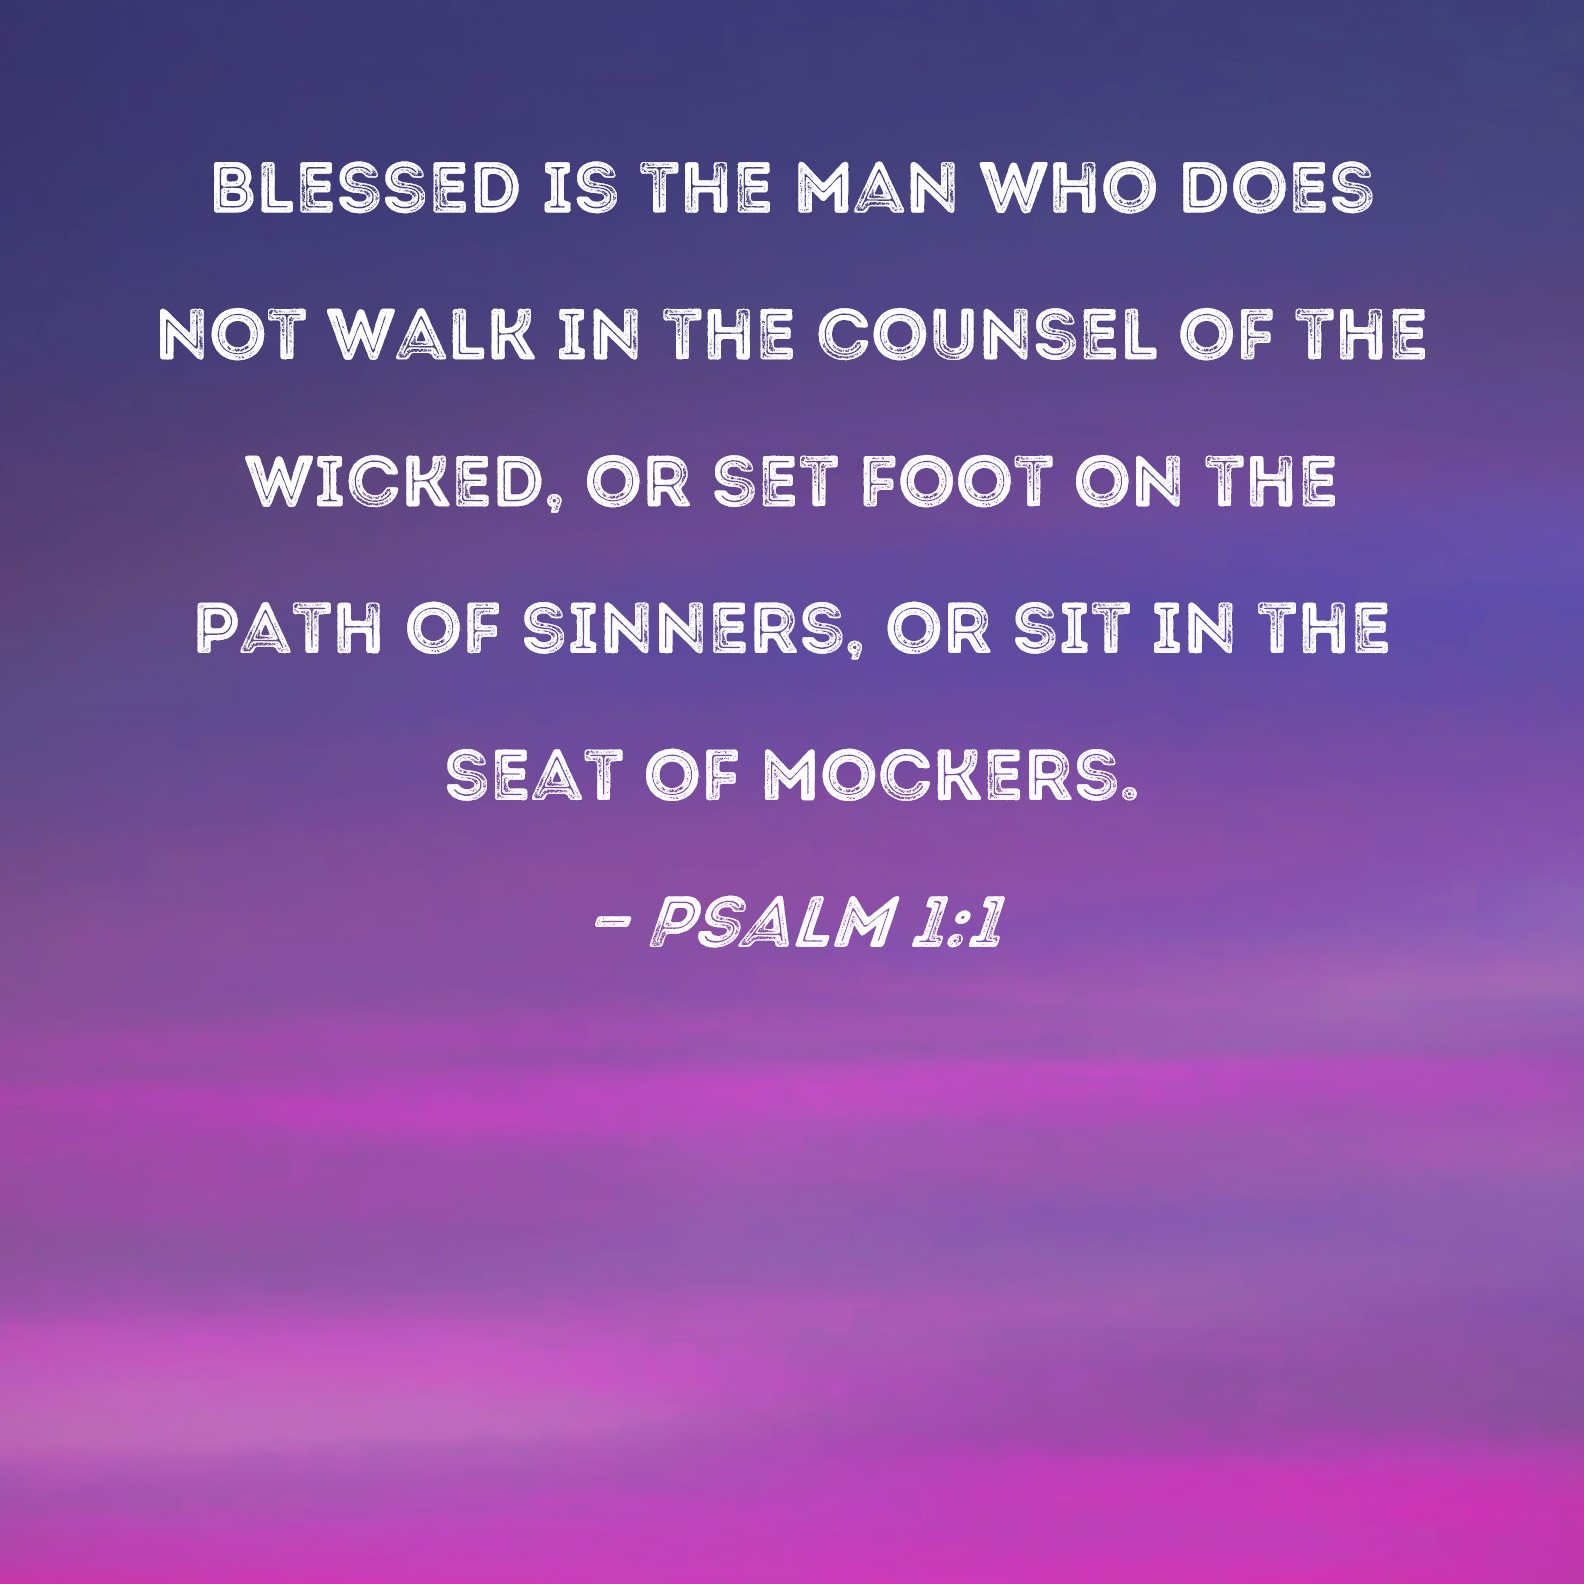 Psalm 1 1 Blessed is the man who does not walk in the counsel of